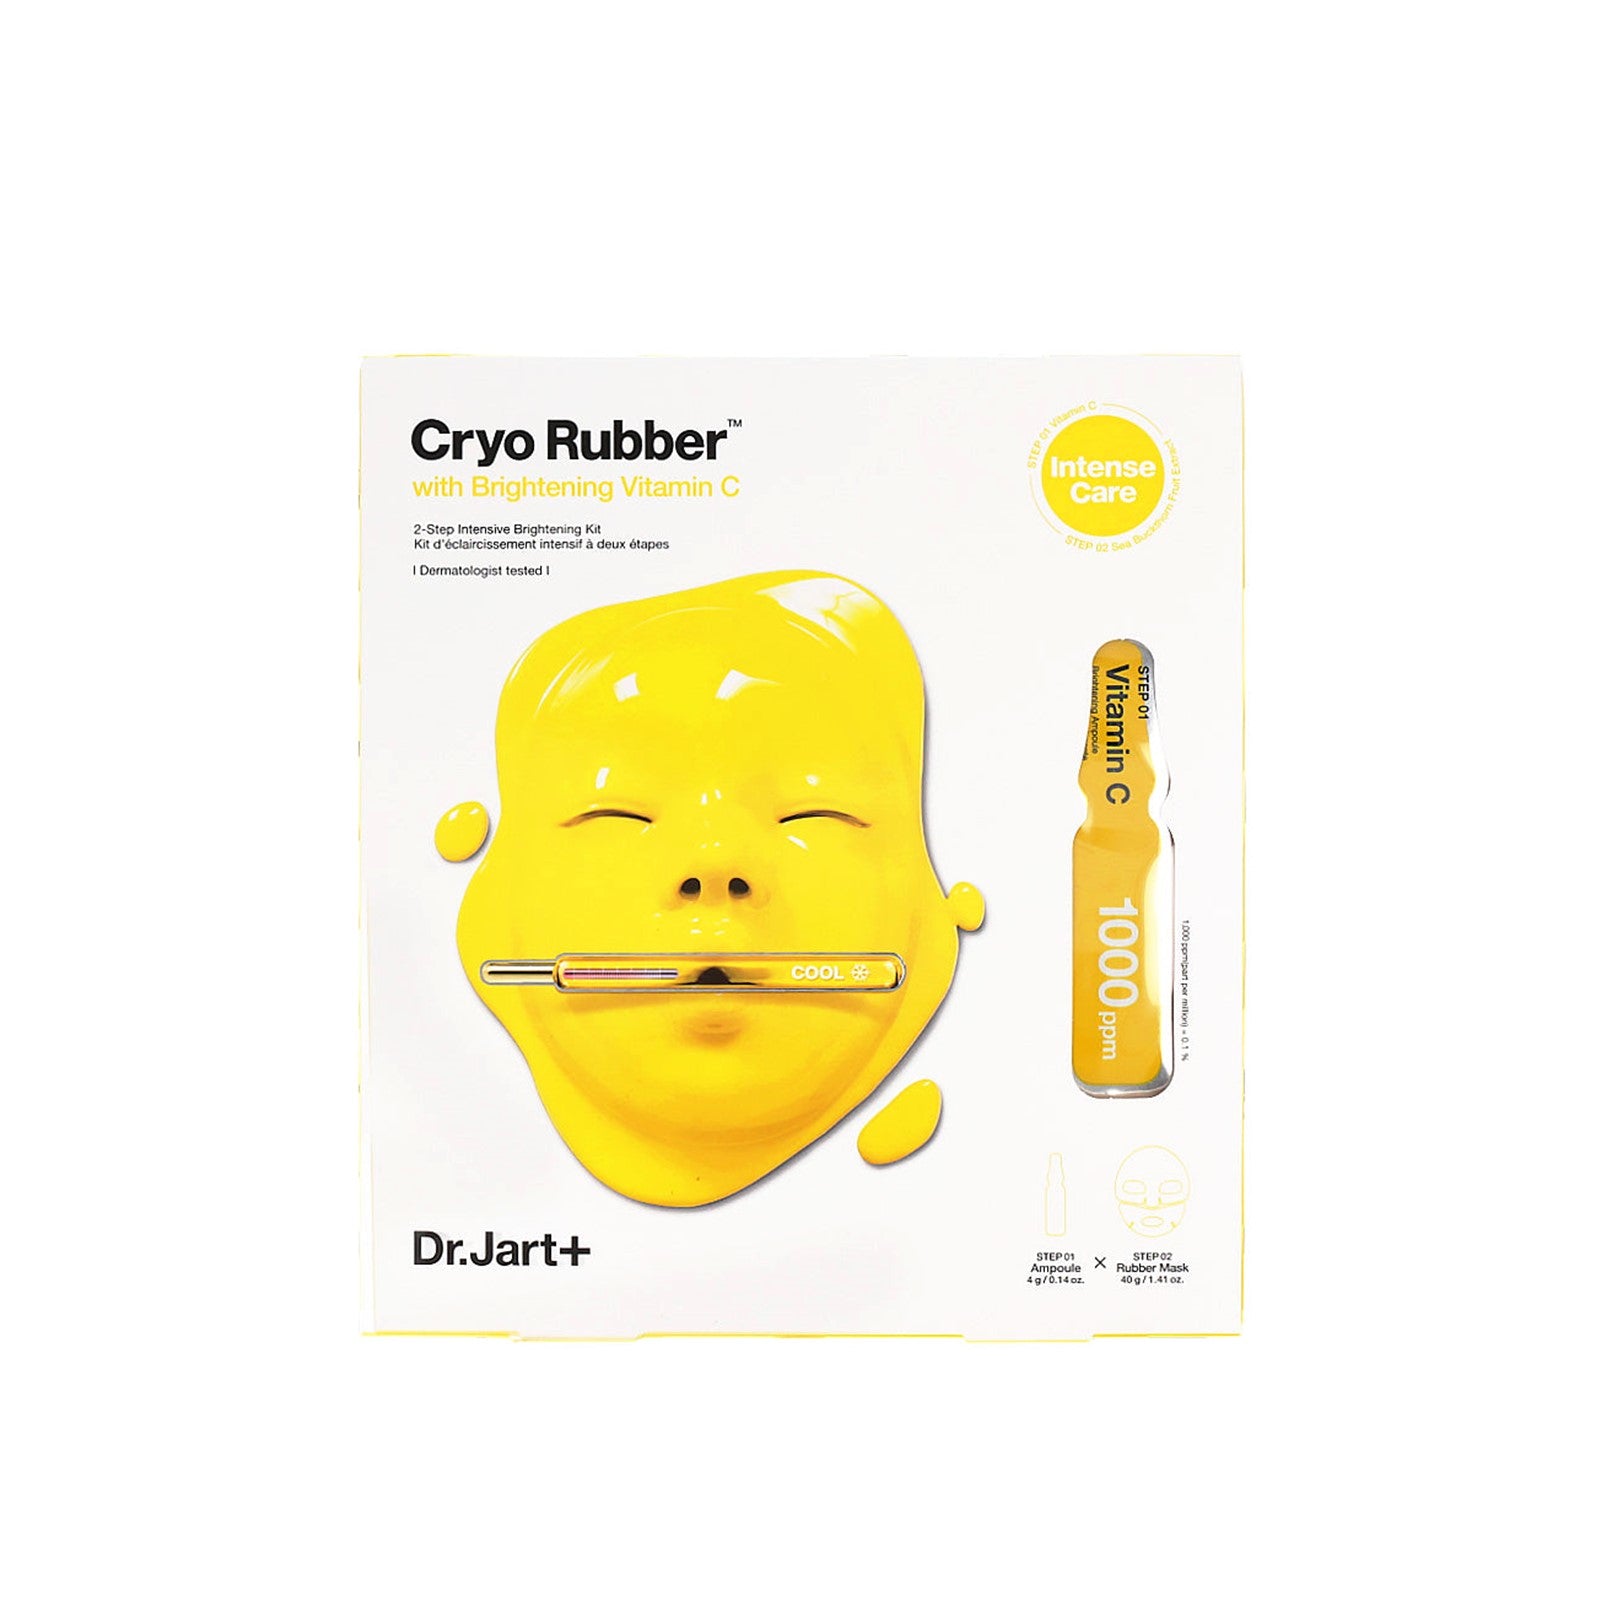 DR.JART+ - Cryo Rubber with Brightening Vitamin C